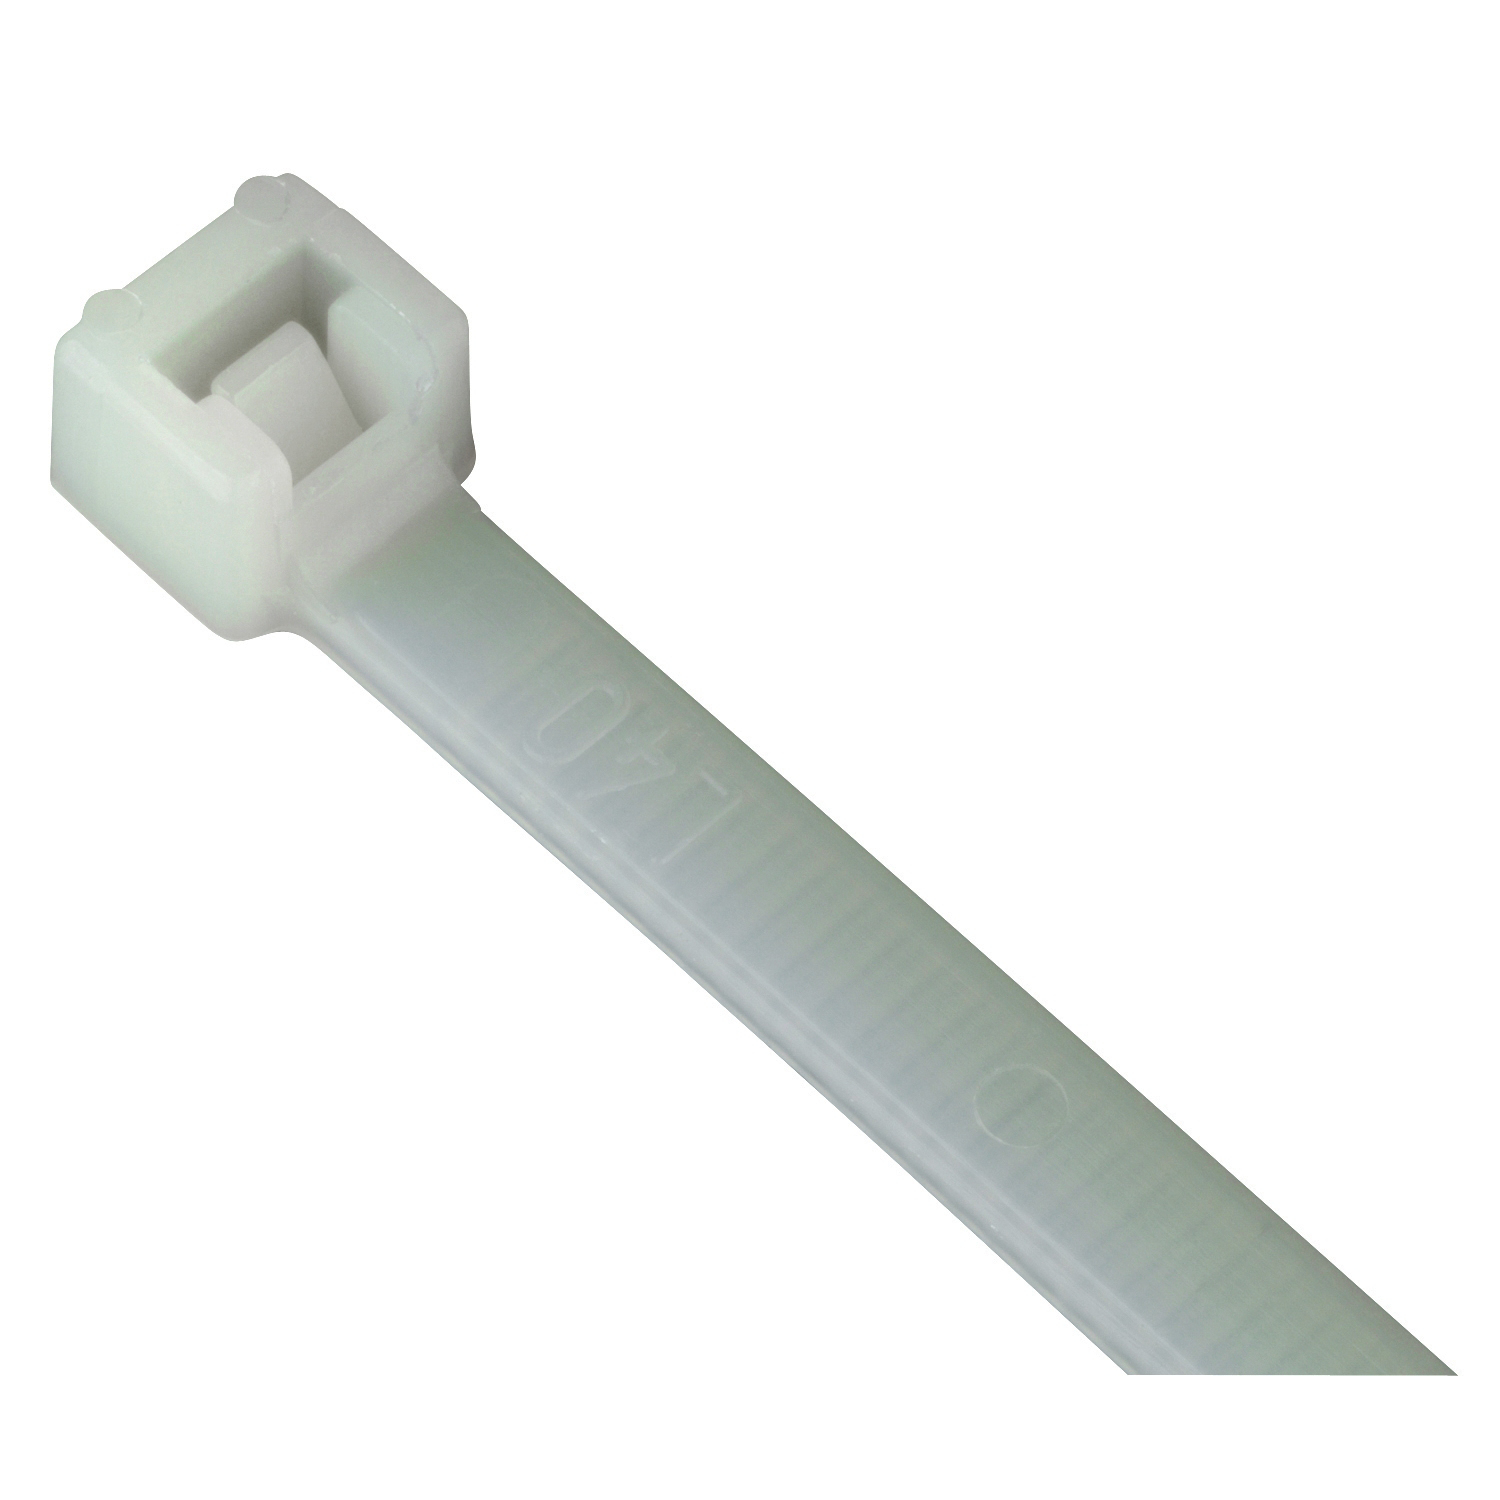 L-14-40-9-C Cable Tie Catamount;ABB - Installation Products